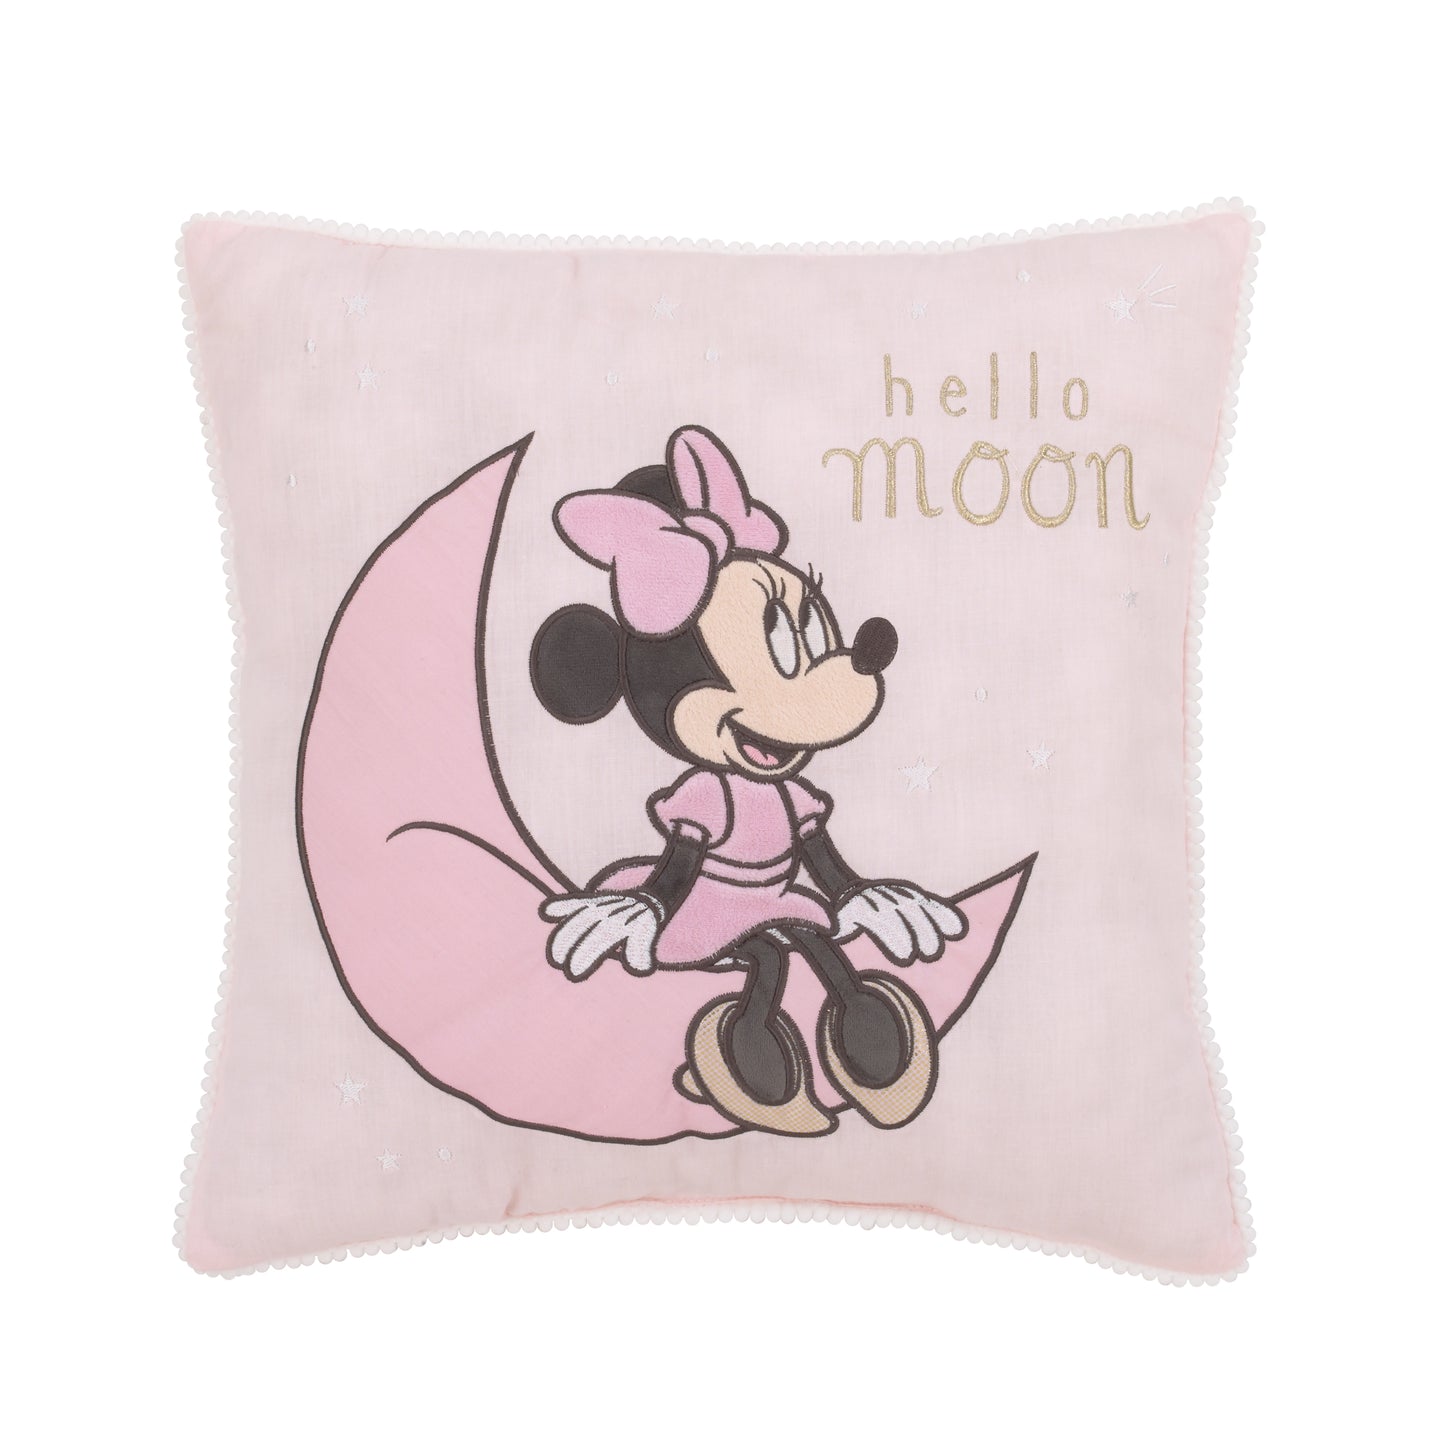 Disney Minnie Mouse Twinkle Twinkle Minnie Pink, White and "Hello Moon" Decorative Pillow